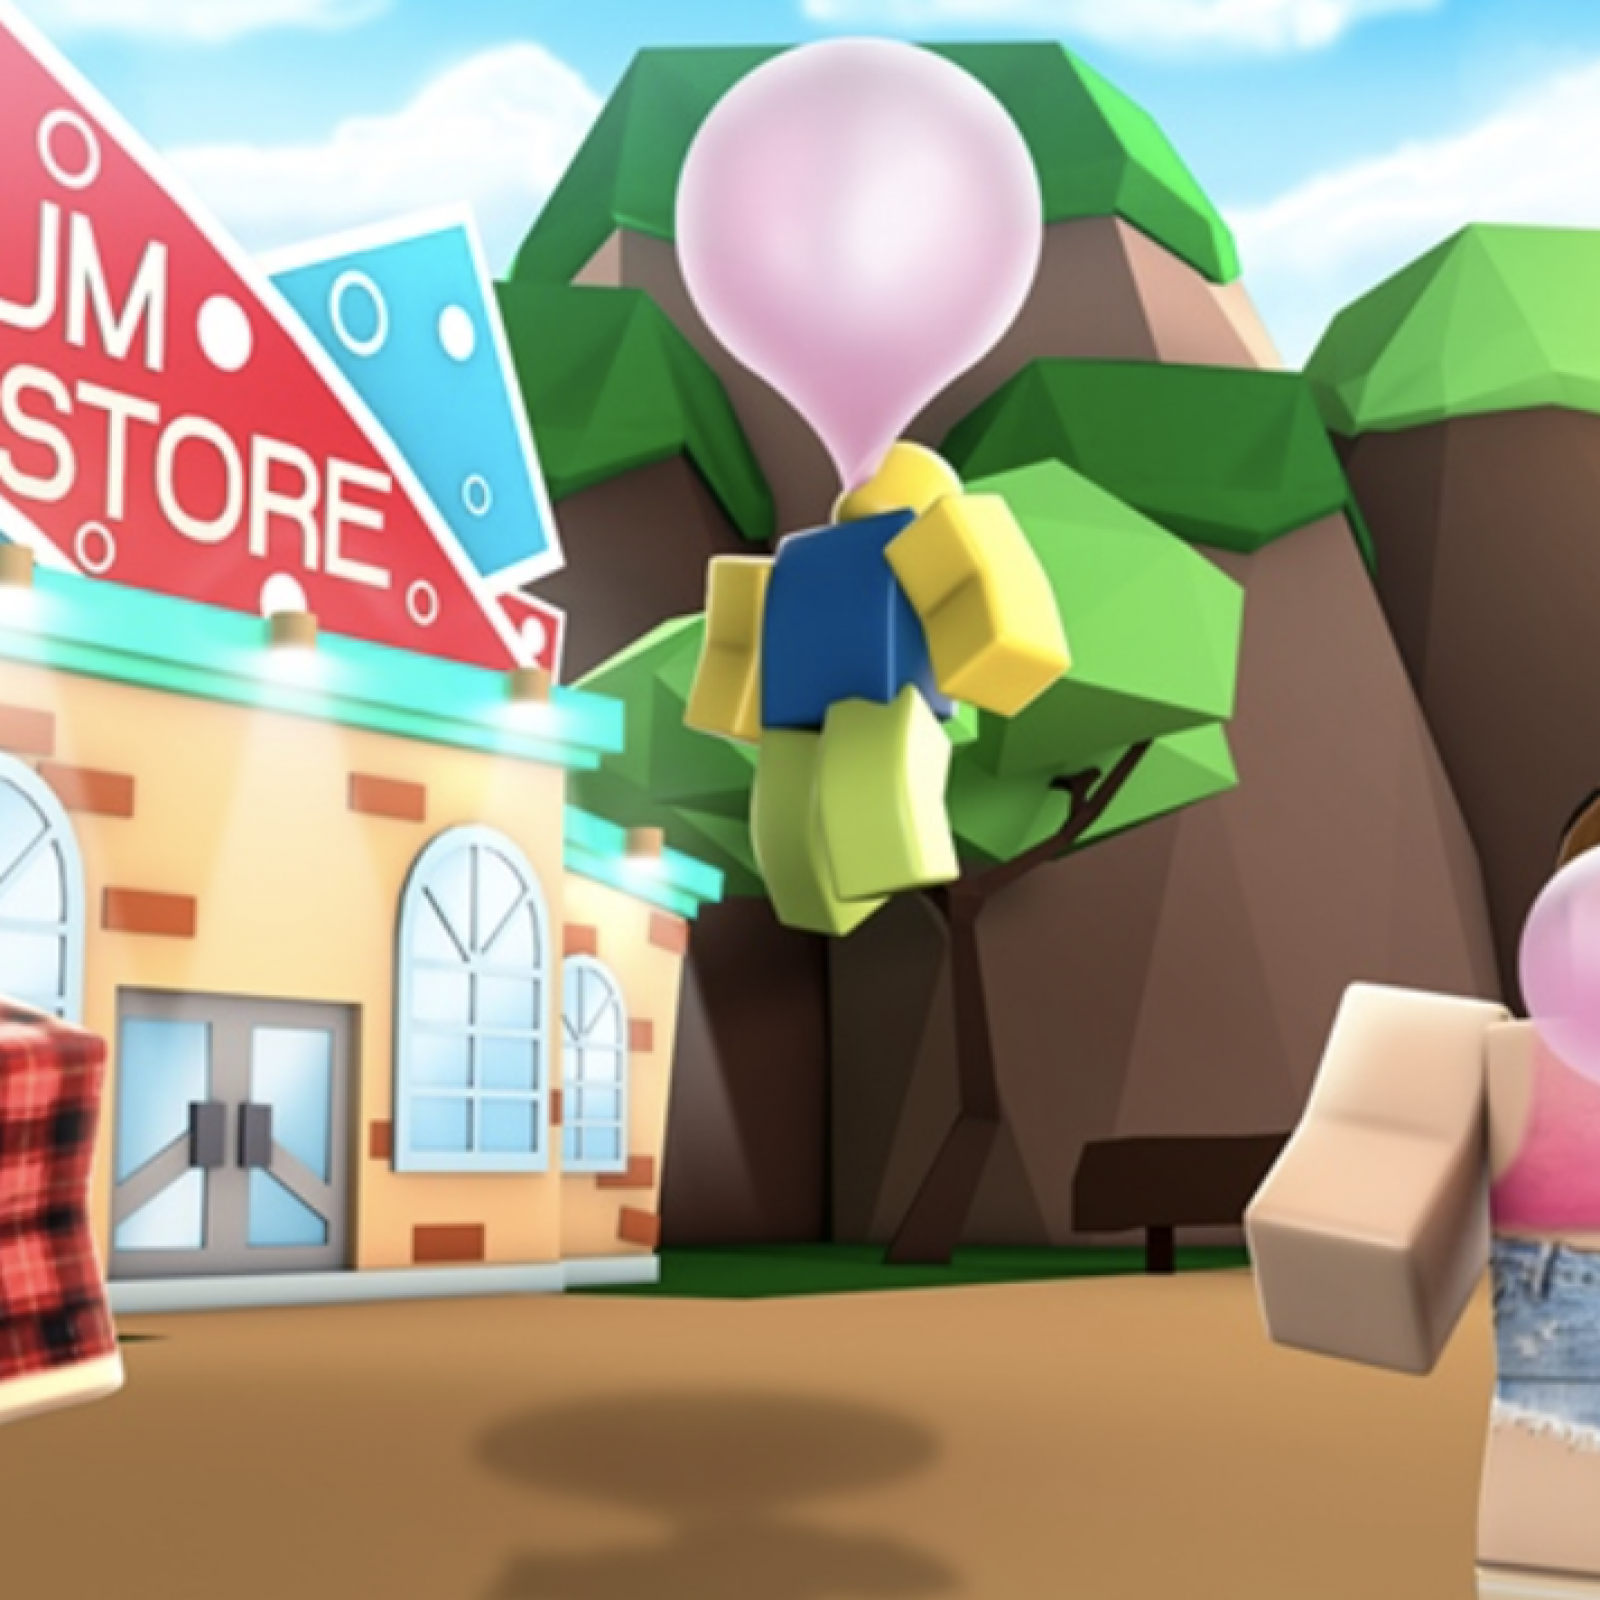 Bubble Gum Simulator Codes All Working Roblox Codes To Get Free